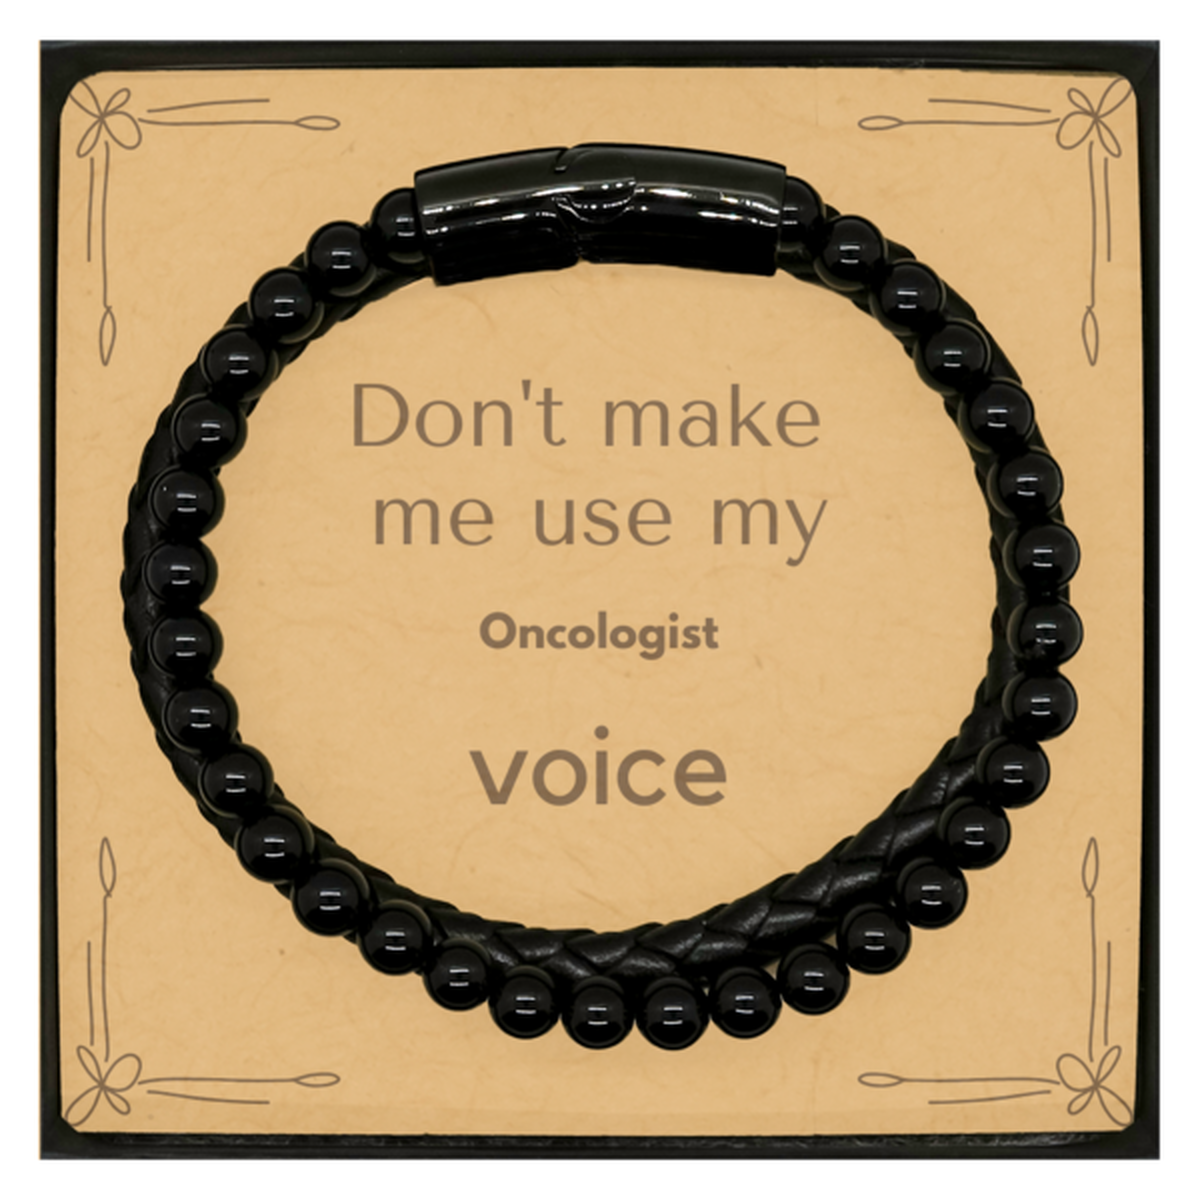 Don't make me use my Oncologist voice, Sarcasm Oncologist Card Gifts, Christmas Oncologist Stone Leather Bracelets Birthday Unique Gifts For Oncologist Coworkers, Men, Women, Colleague, Friends